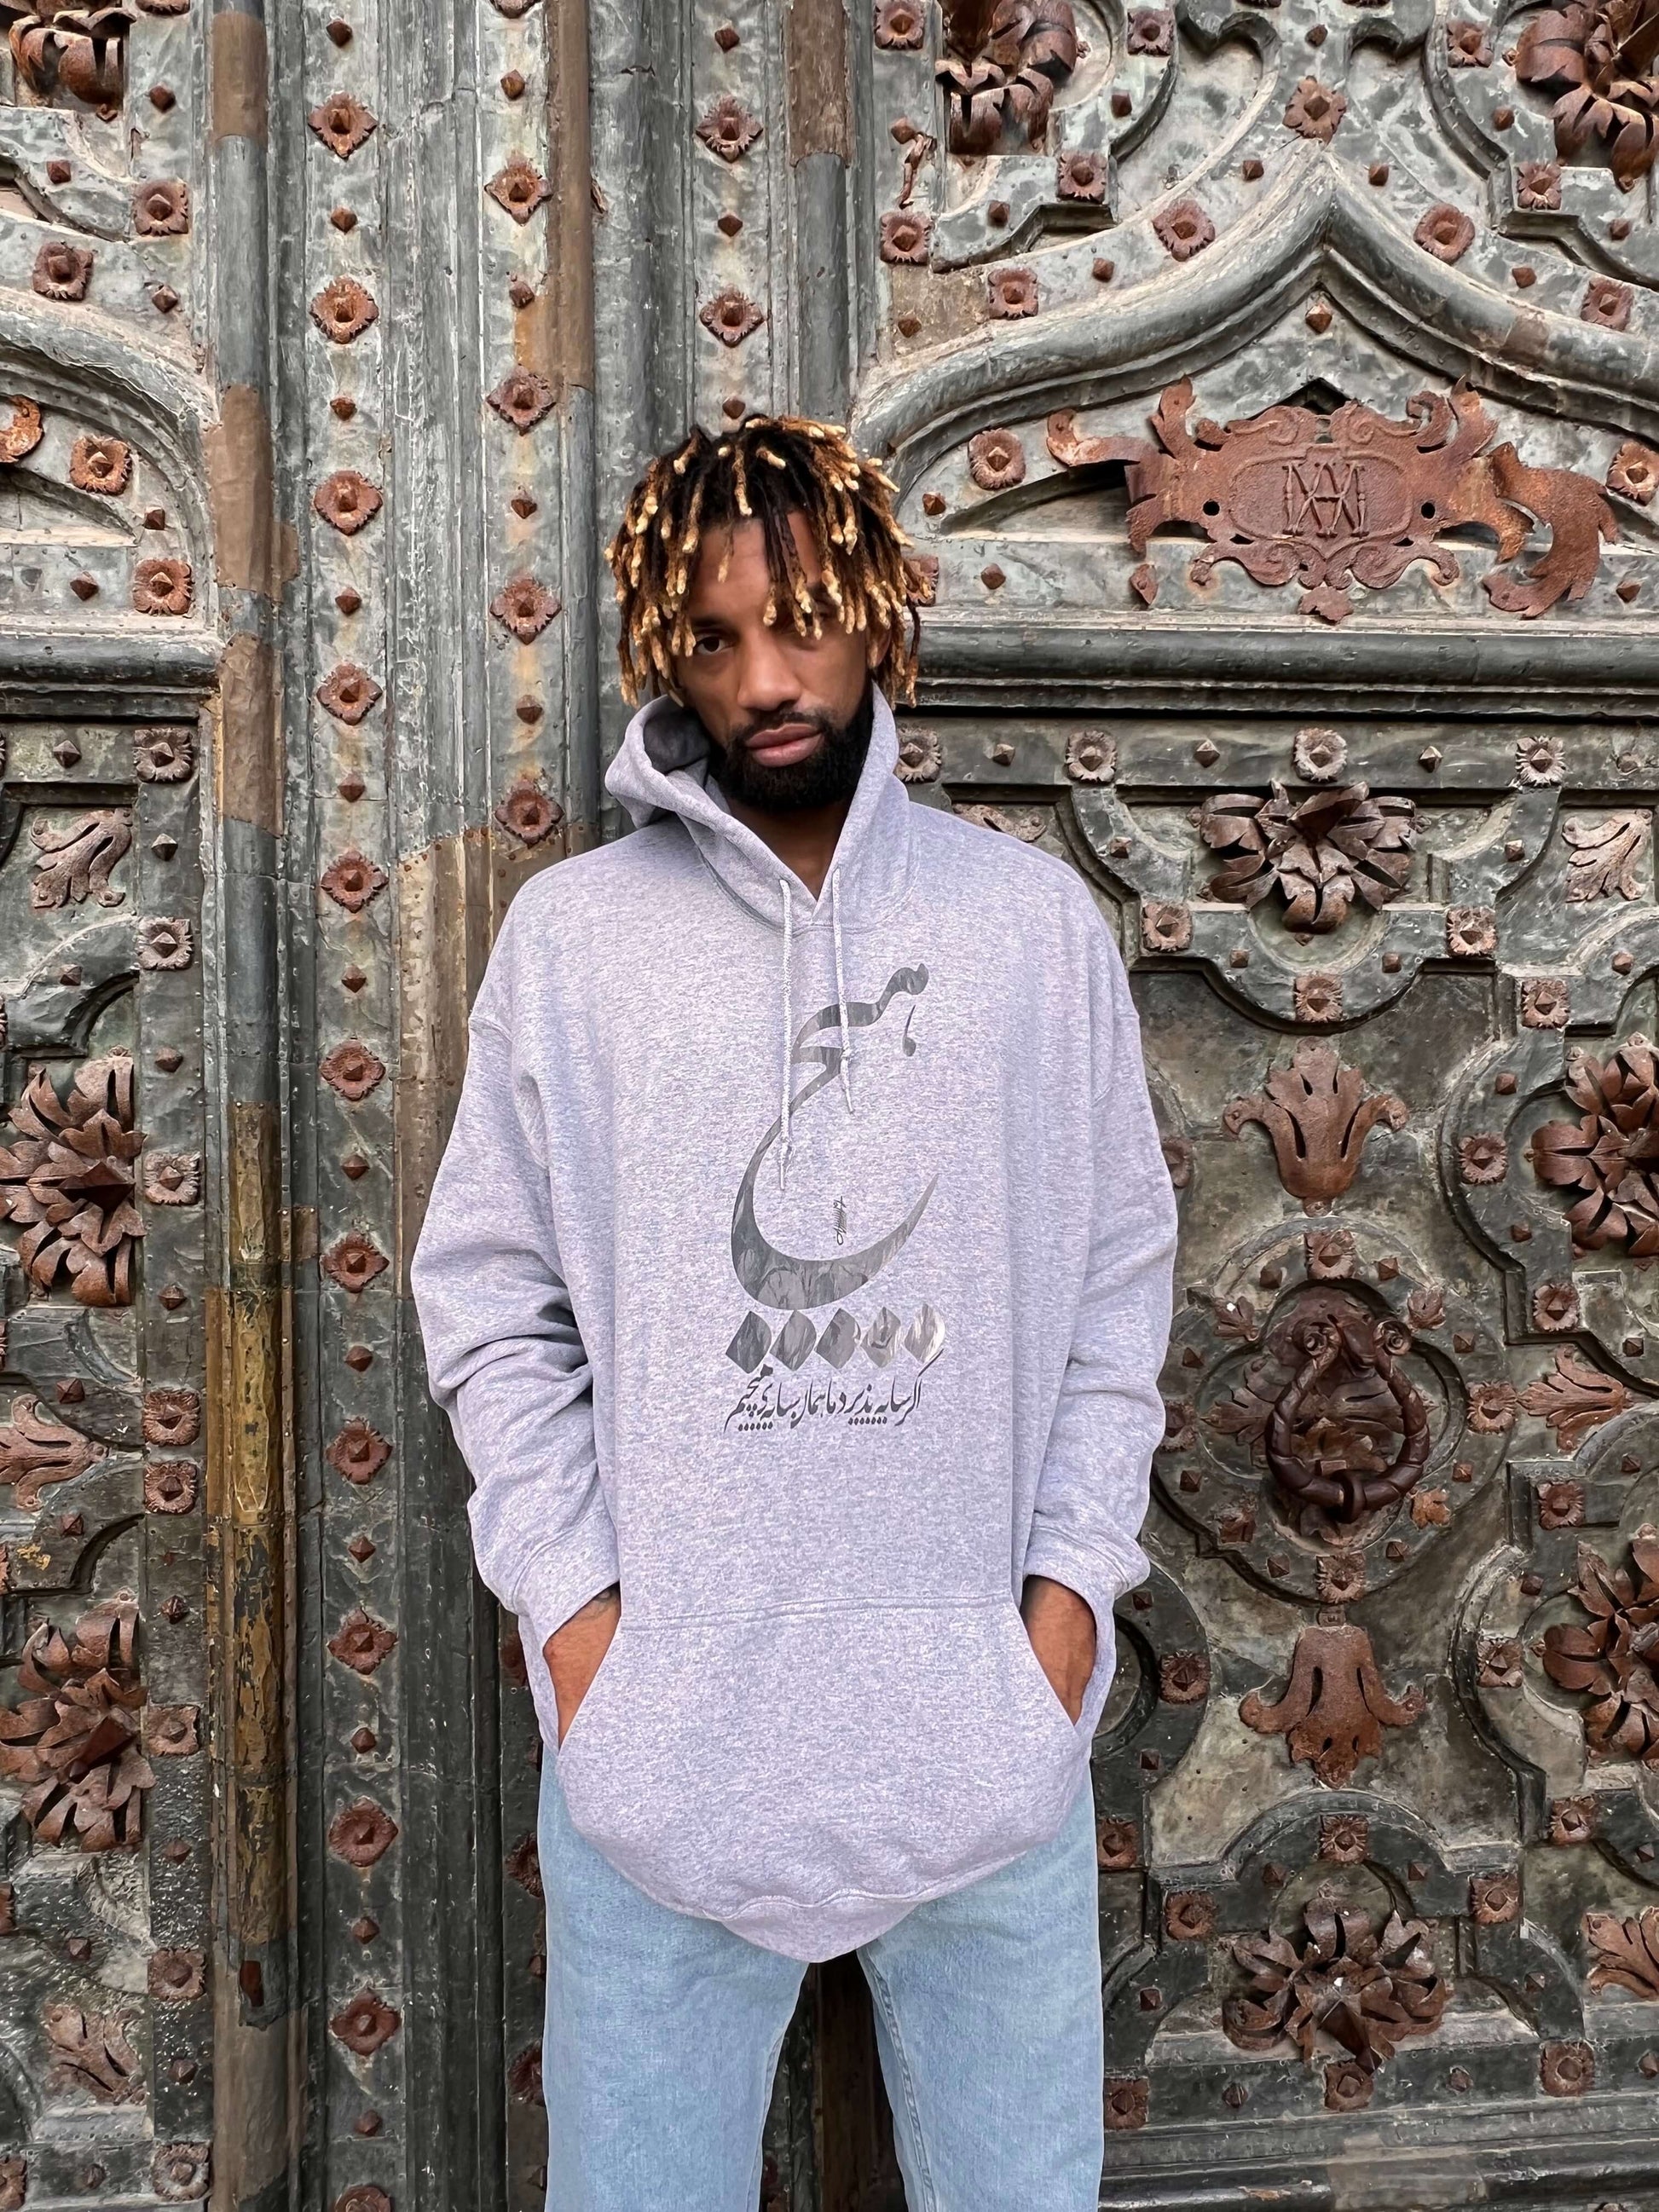 khem Birch is wearing Contemporary hoodie with a touch of Persian elegance, ideal for relaxation.